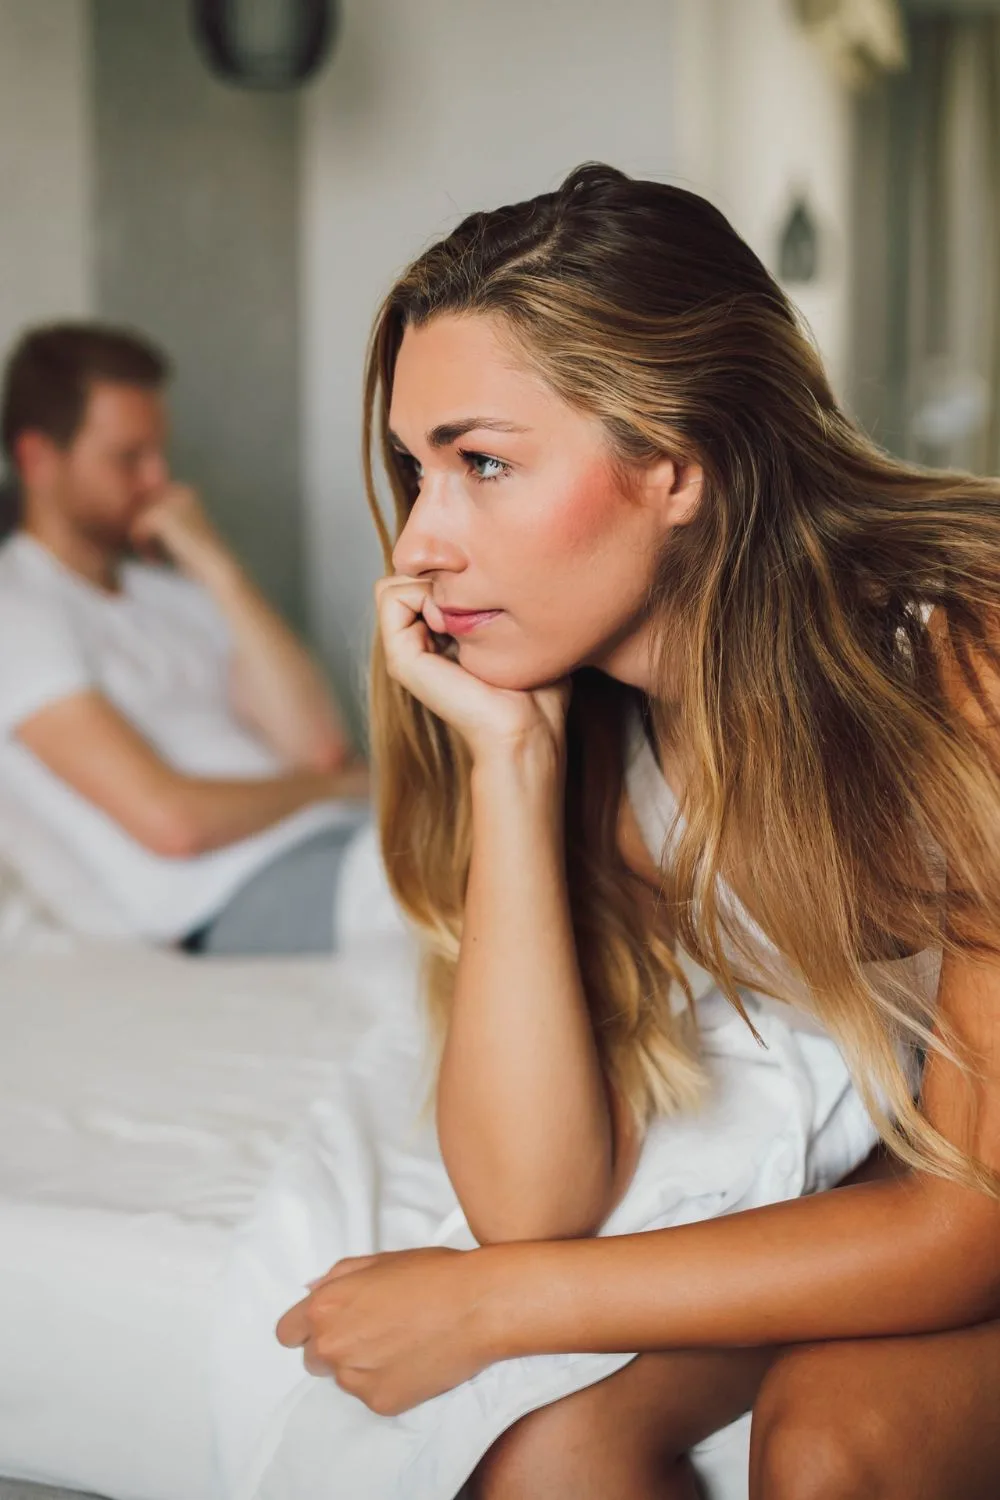 Signs A Man Is Unhappy In His Marriage